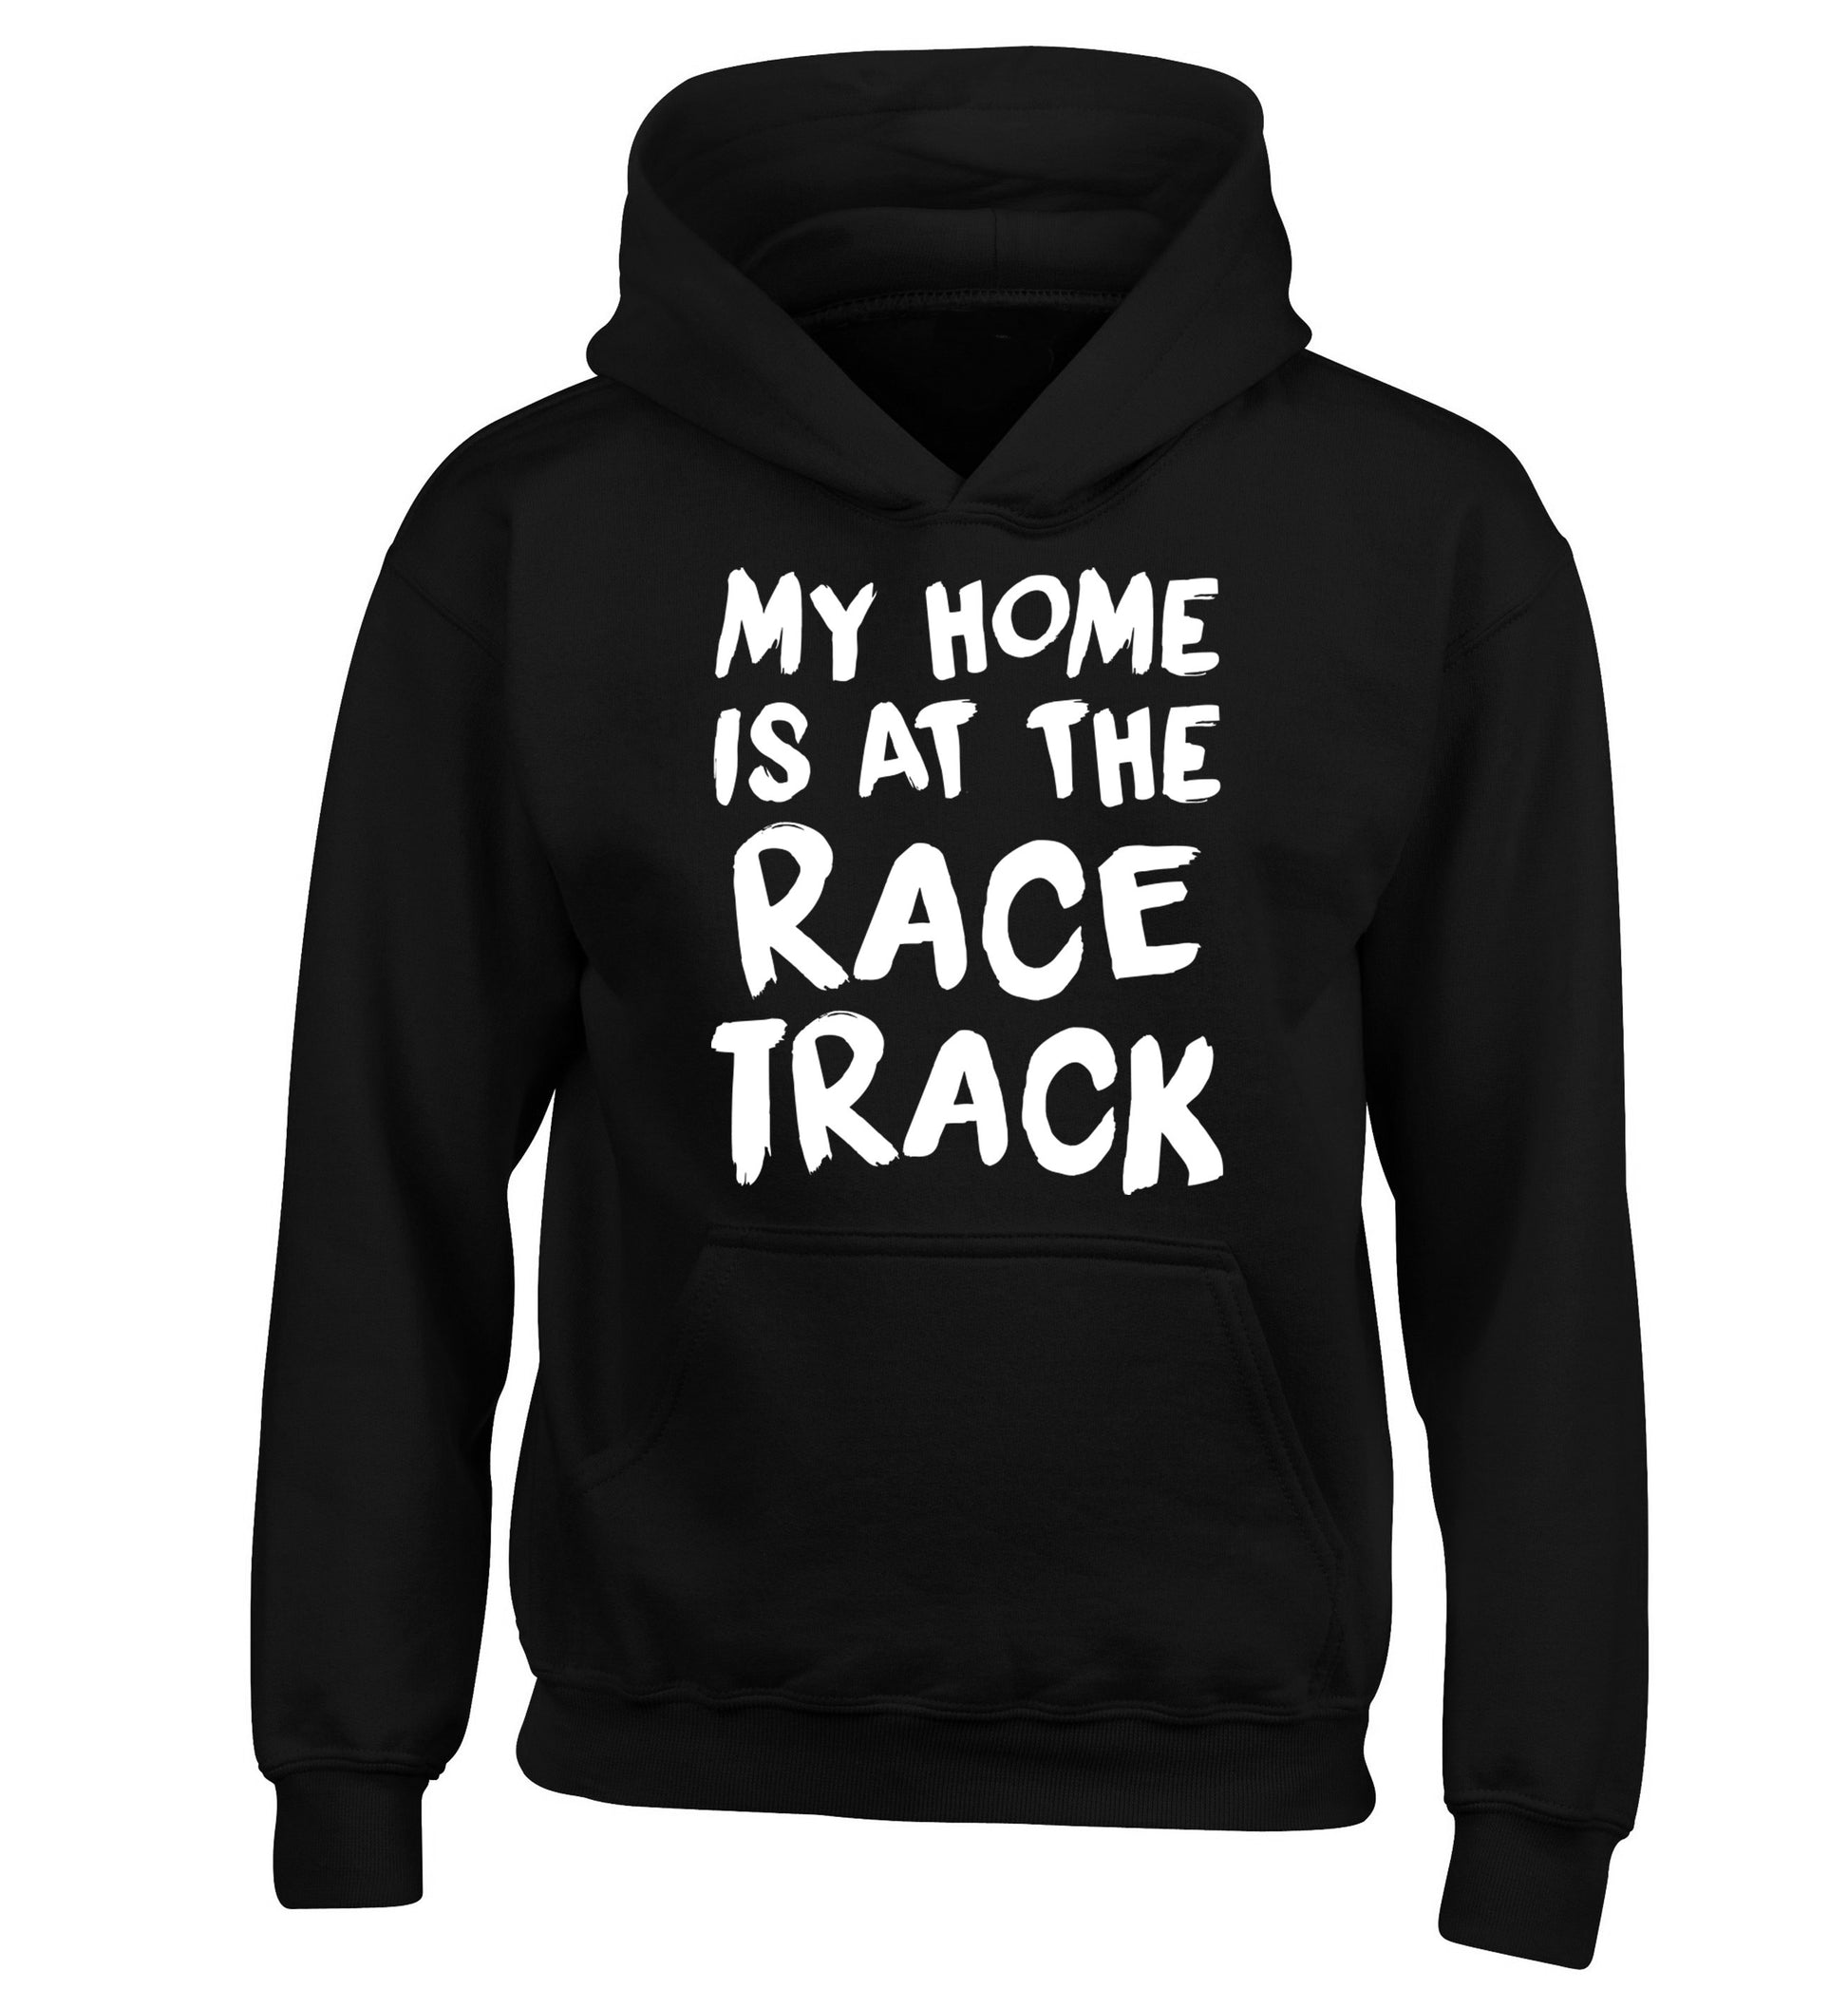 My home is at the race track children's black hoodie 12-14 Years